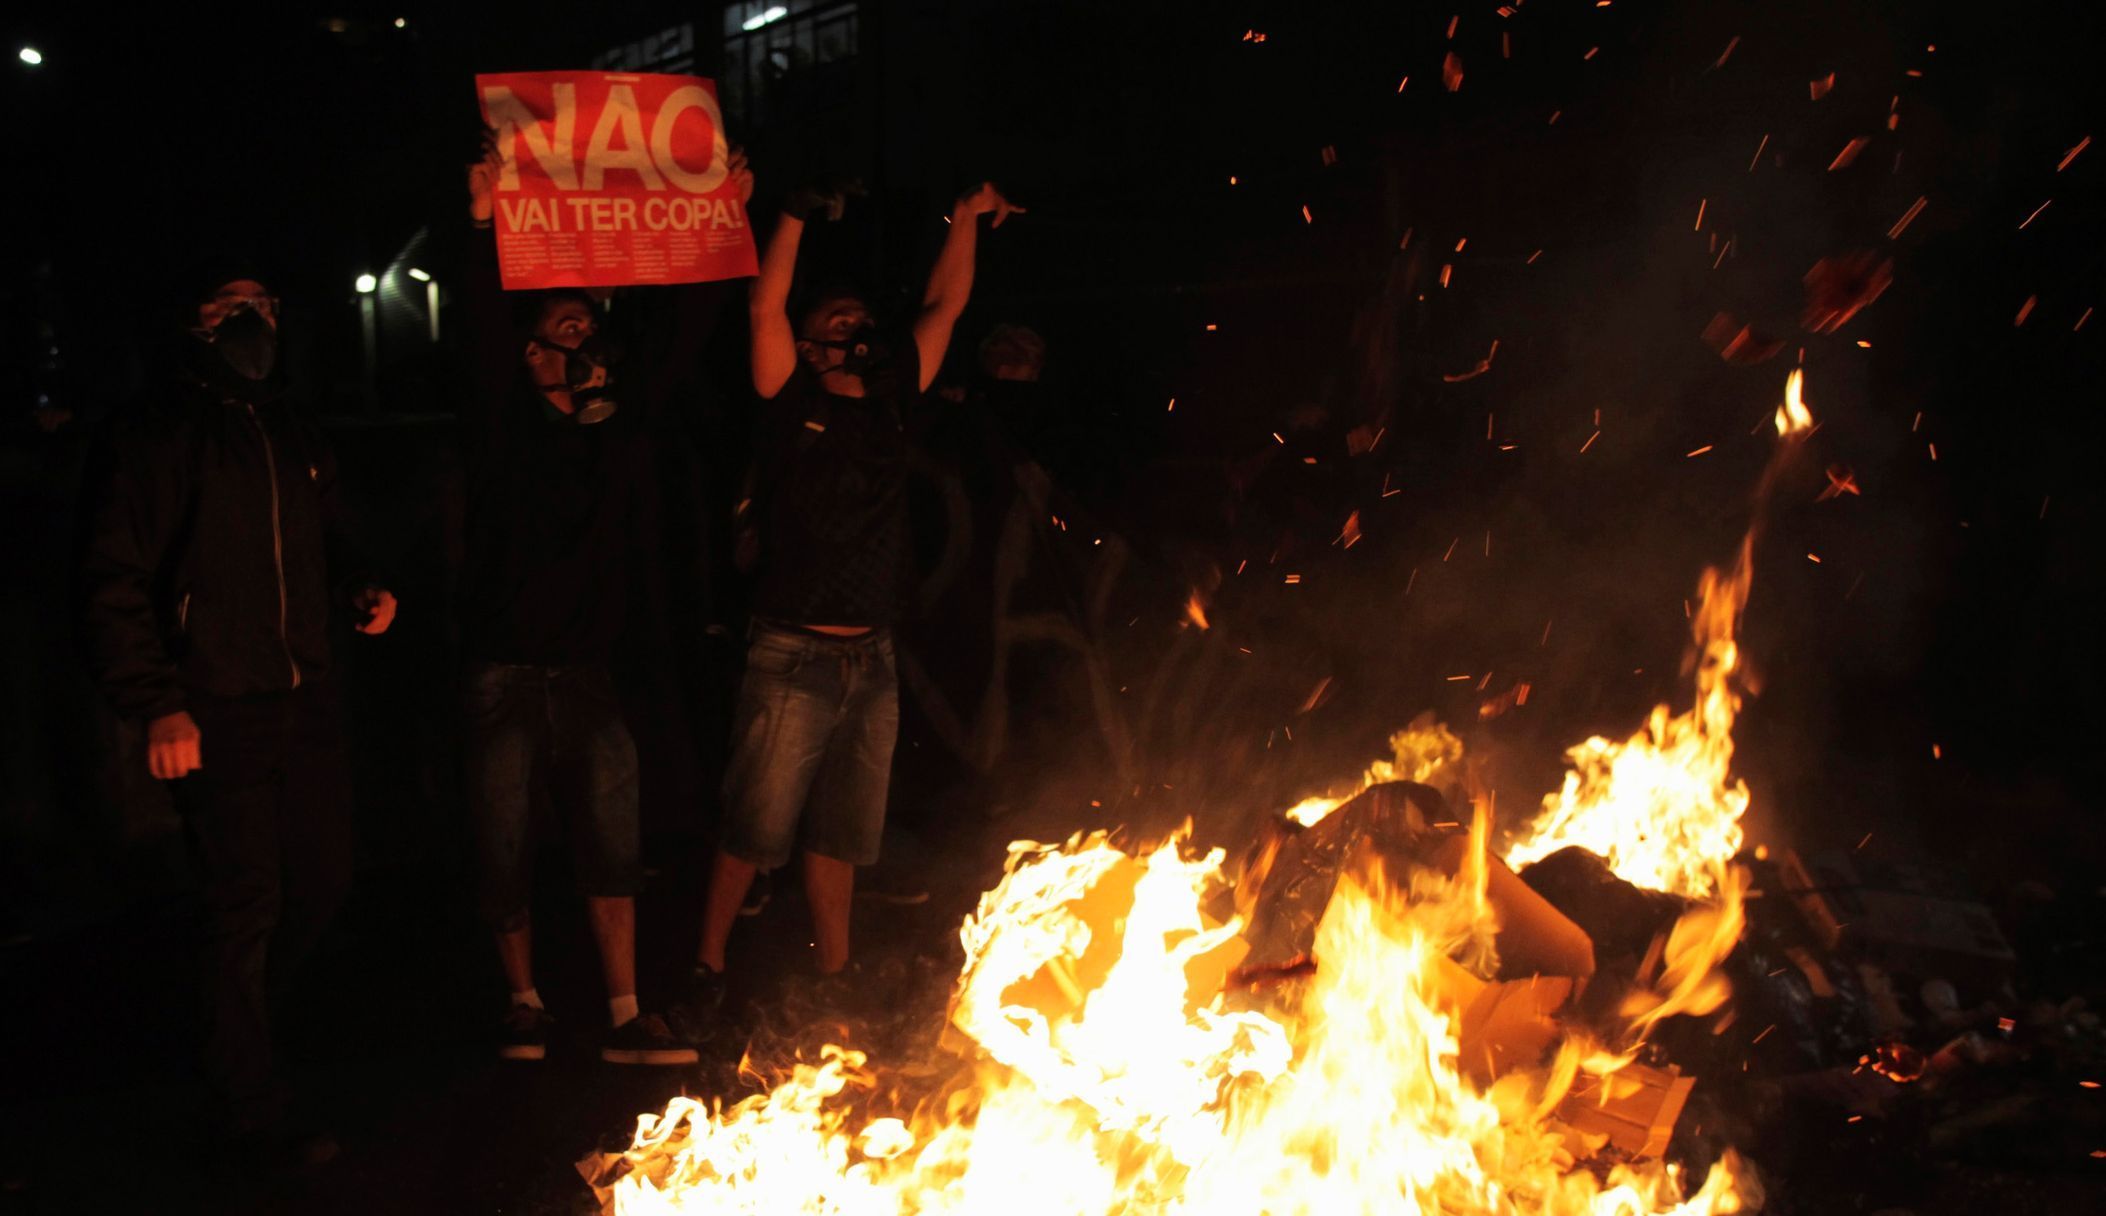 Demonstrators protest against the 2014 World Cup in Sao Paulo